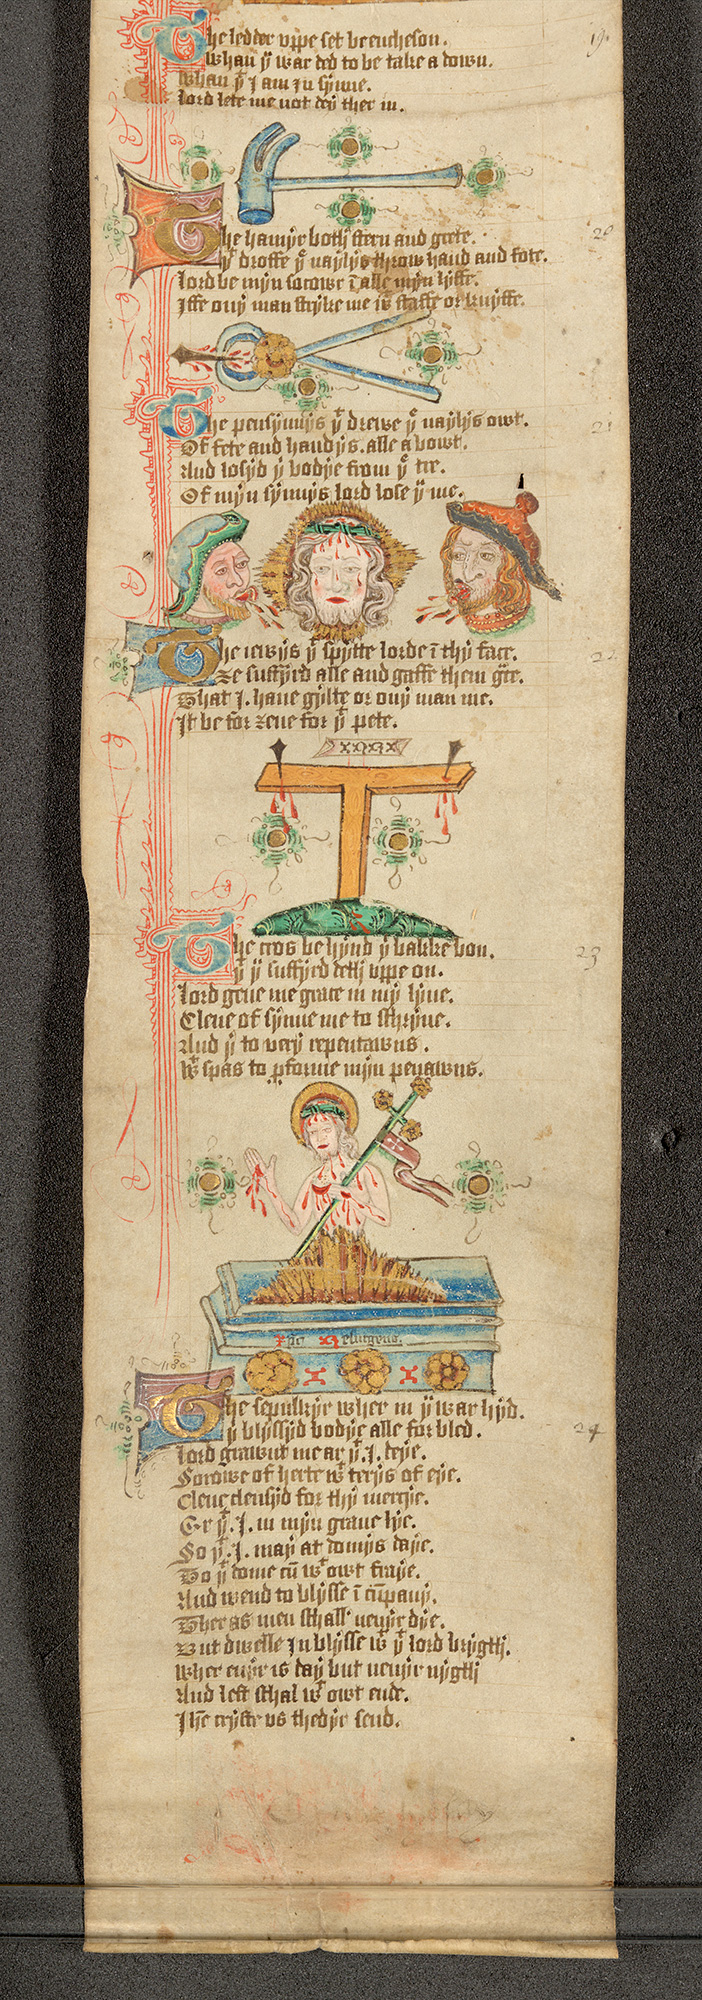 An English Arma Christi Roll, second quarter of the 15th century, ink on vellum, 134.5 x 9 cm (The British Library)